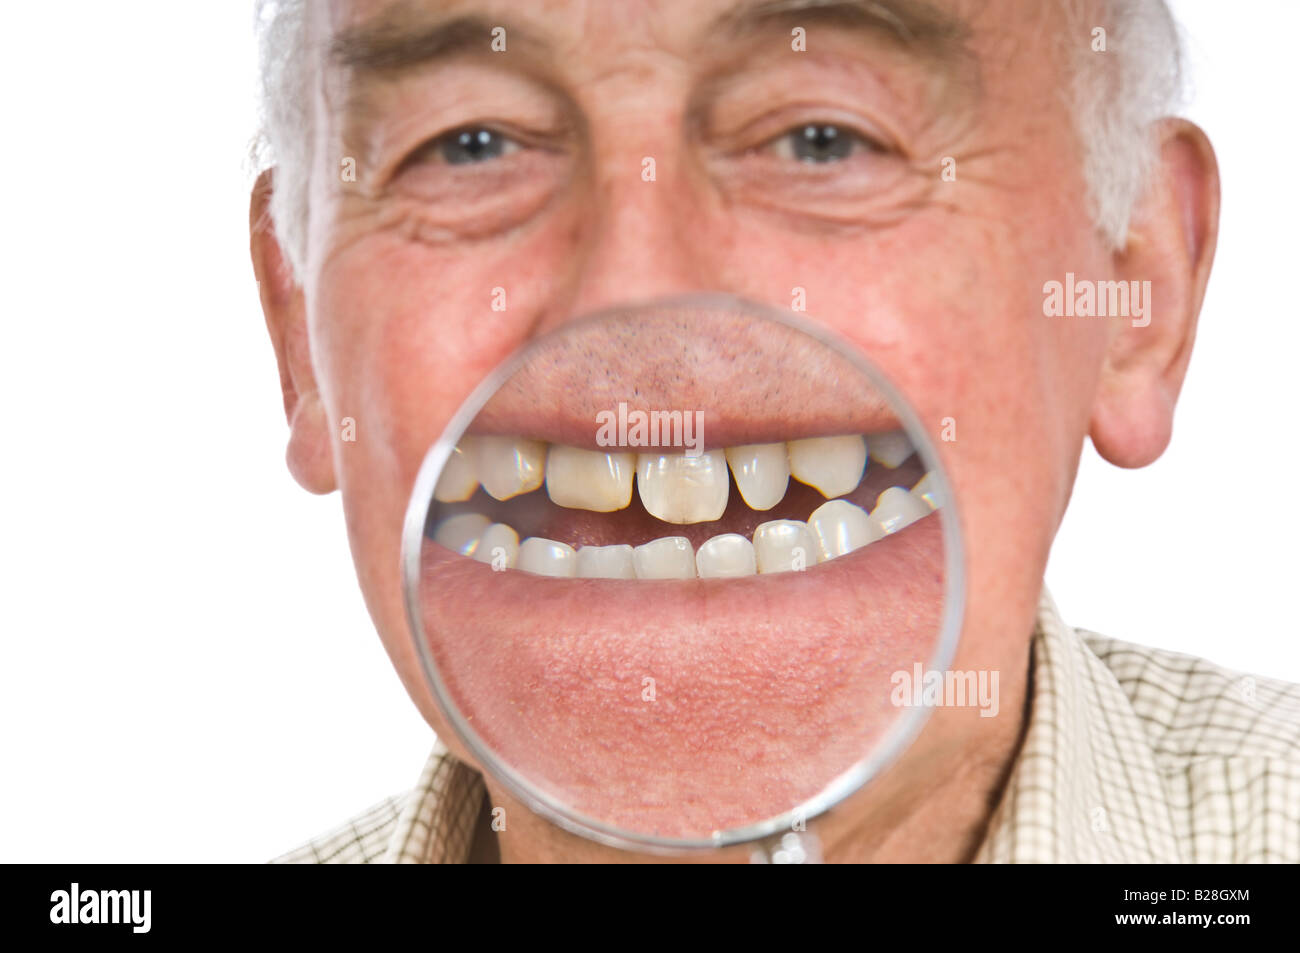 A comical image of an elderly man with a magnifying glass to enlarge his mouth against a pure white (255) background. Stock Photo